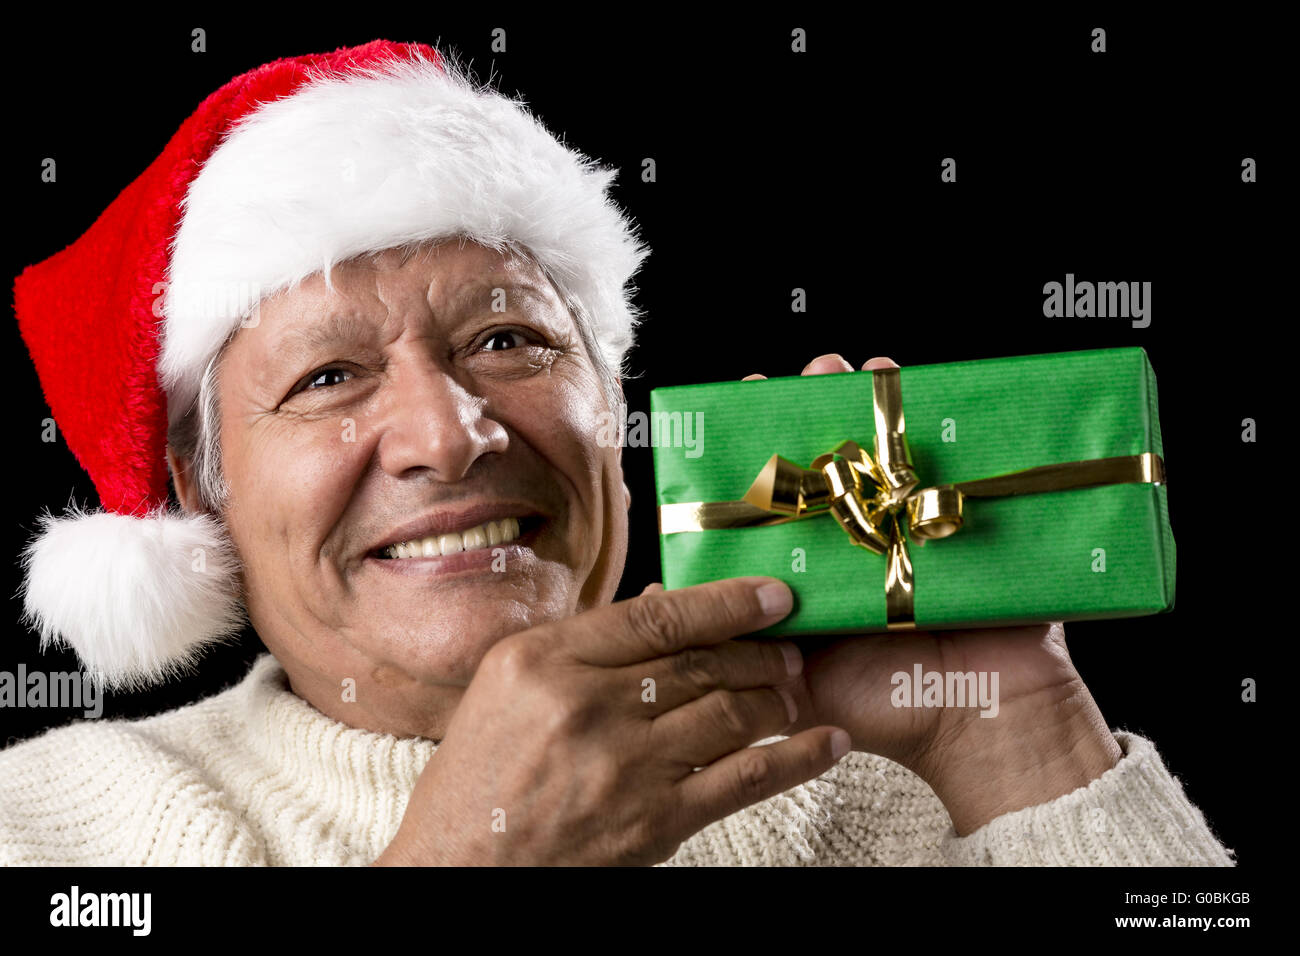 Elderly Man with Santa Cap And Green Wrapped Gift Stock Photo